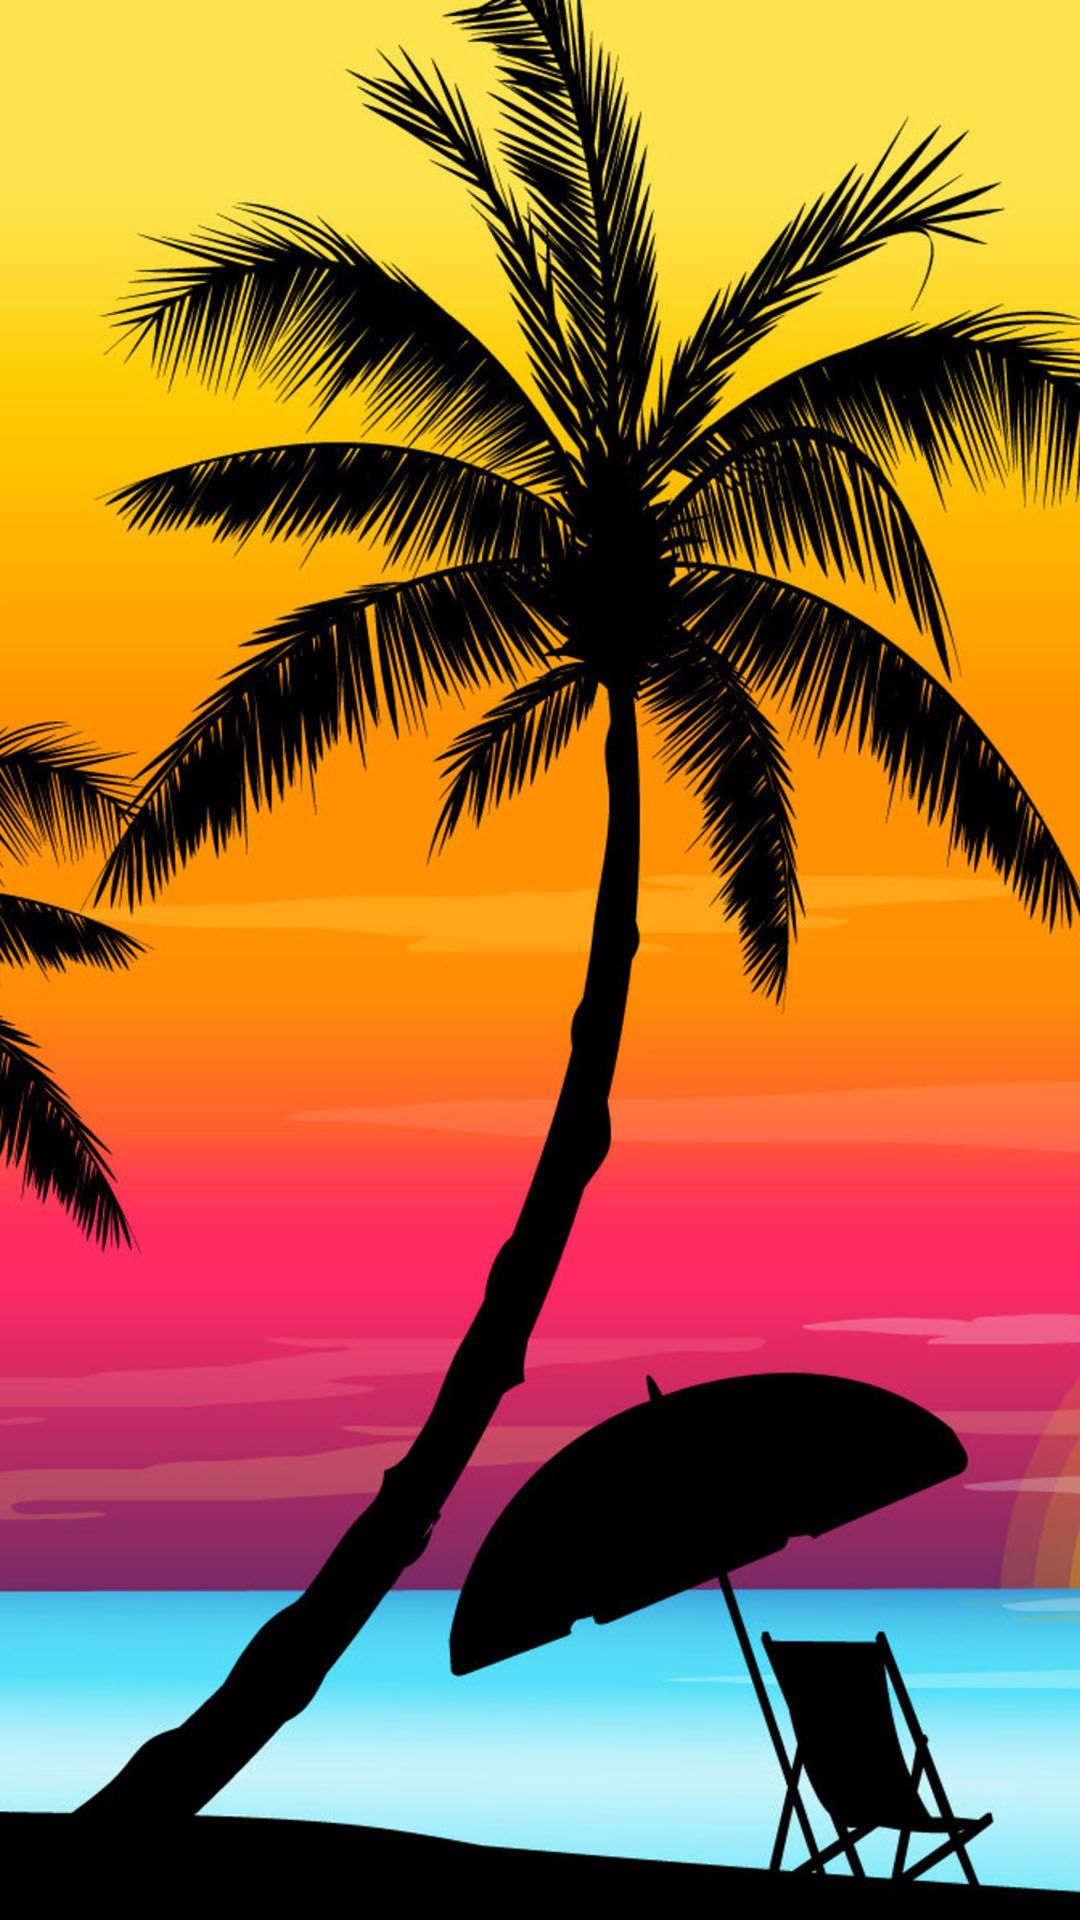 Colorful Beach Sunset Silhouette Android Wallpaper free download